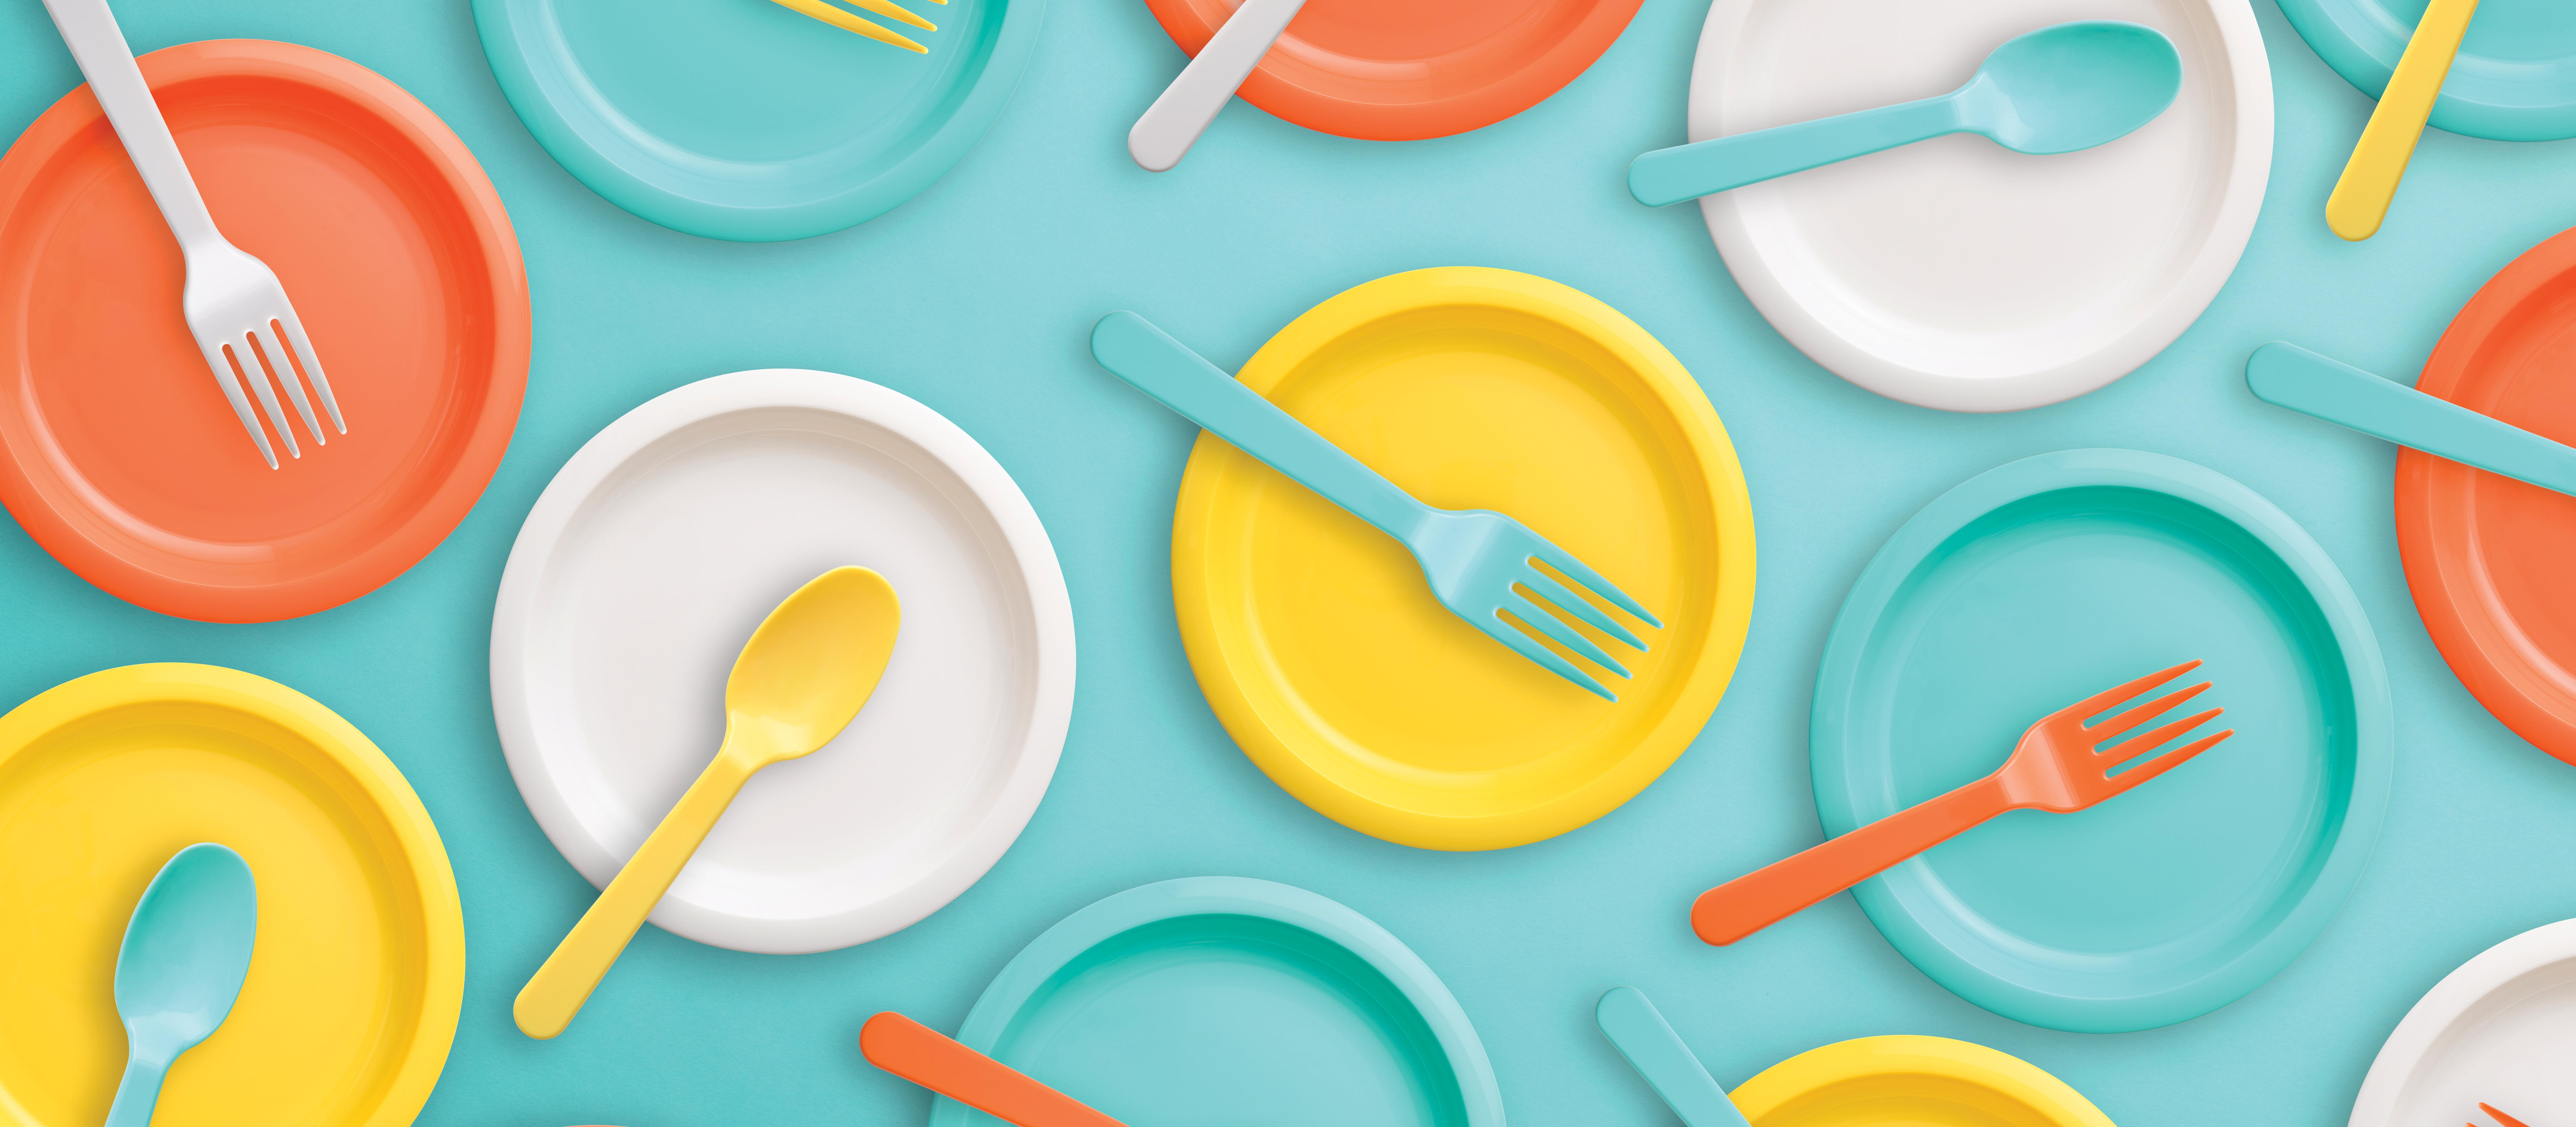 Paper plate background